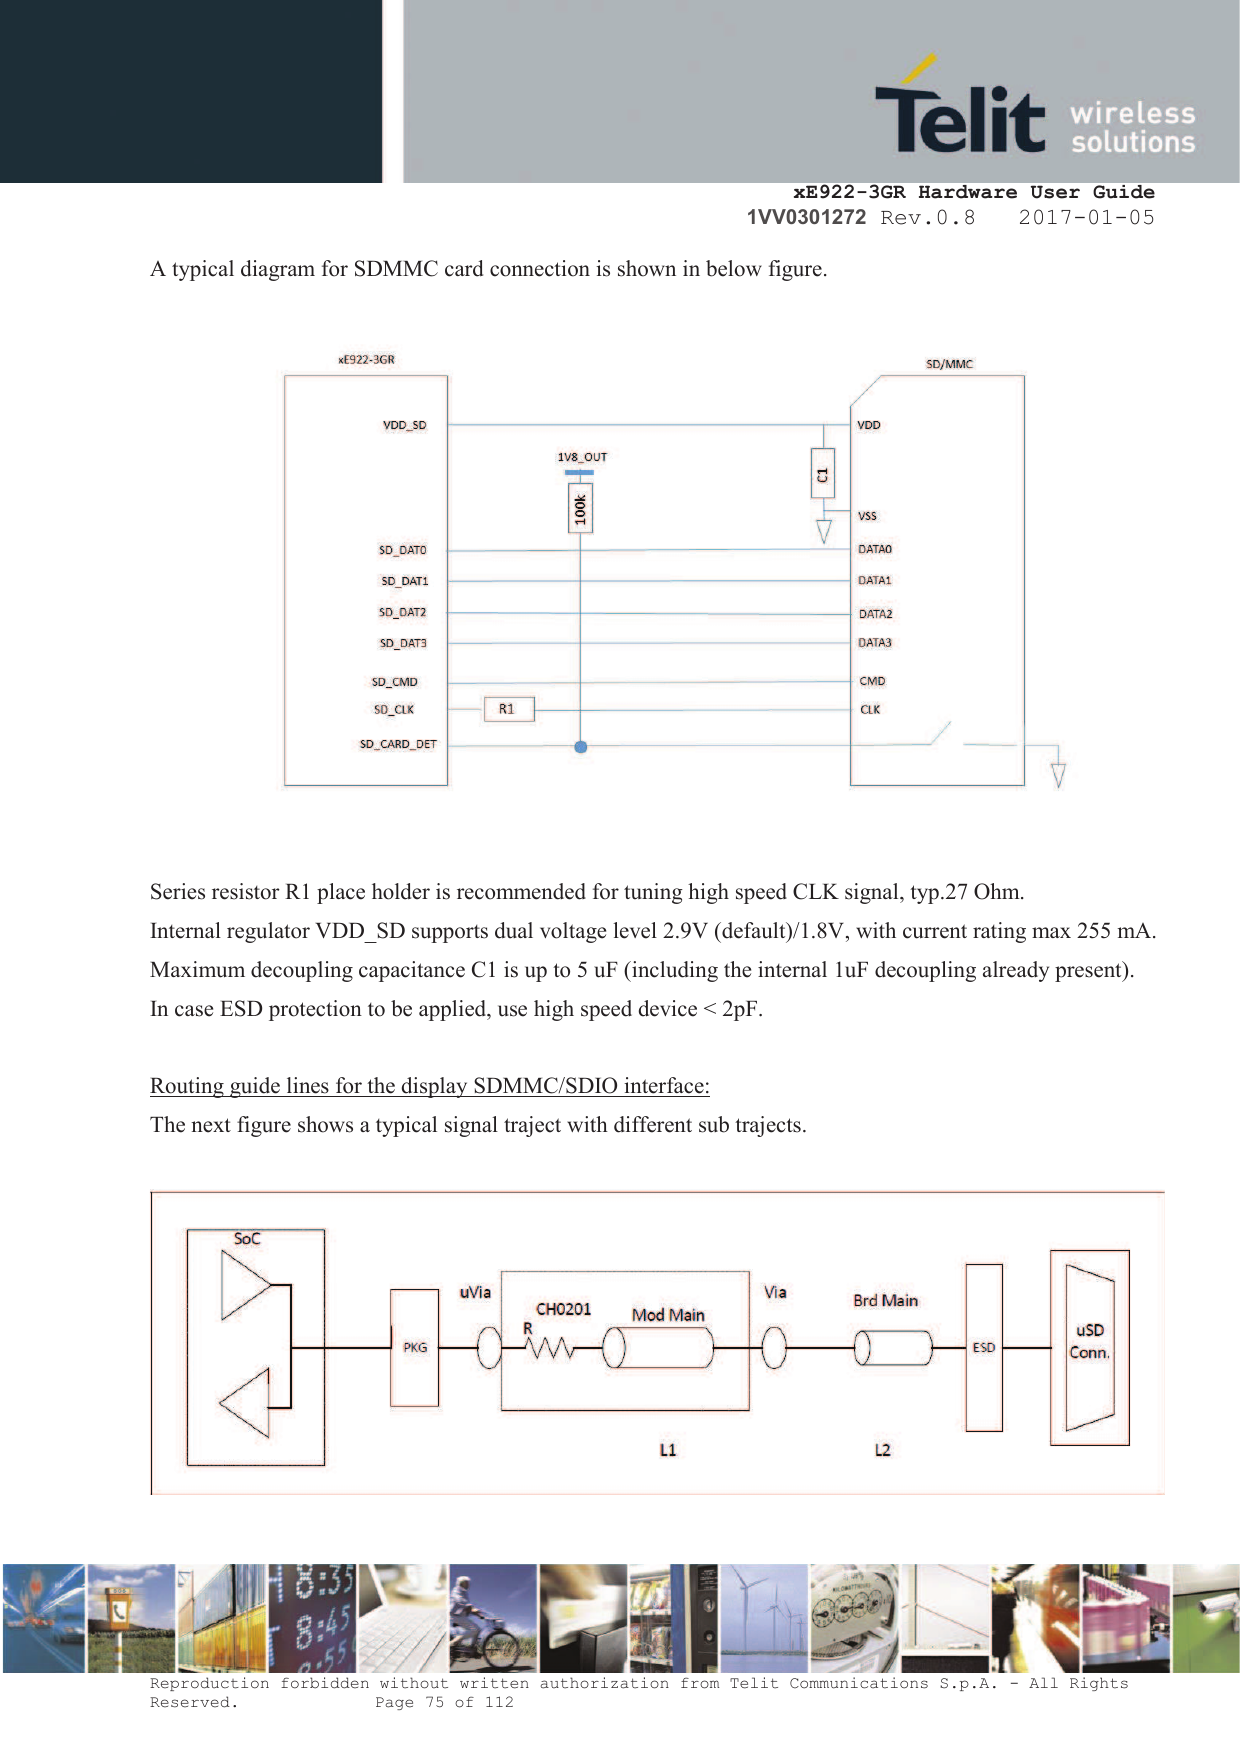     xE922-3GR Hardware User Guide 1VV0301272 Rev.0.8   2017-01-05 Reproduction forbidden without written authorization from Telit Communications S.p.A. - All Rights Reserved.    Page 75 of 112  A typical diagram for SDMMC card connection is shown in below figure.  Series resistor R1 place holder is recommended for tuning high speed CLK signal, typ.27 Ohm. Internal regulator VDD_SD supports dual voltage level 2.9V (default)/1.8V, with current rating max 255 mA. Maximum decoupling capacitance C1 is up to 5 uF (including the internal 1uF decoupling already present). In case ESD protection to be applied, use high speed device &lt; 2pF.  Routing guide lines for the display SDMMC/SDIO interface: The next figure shows a typical signal traject with different sub trajects.     